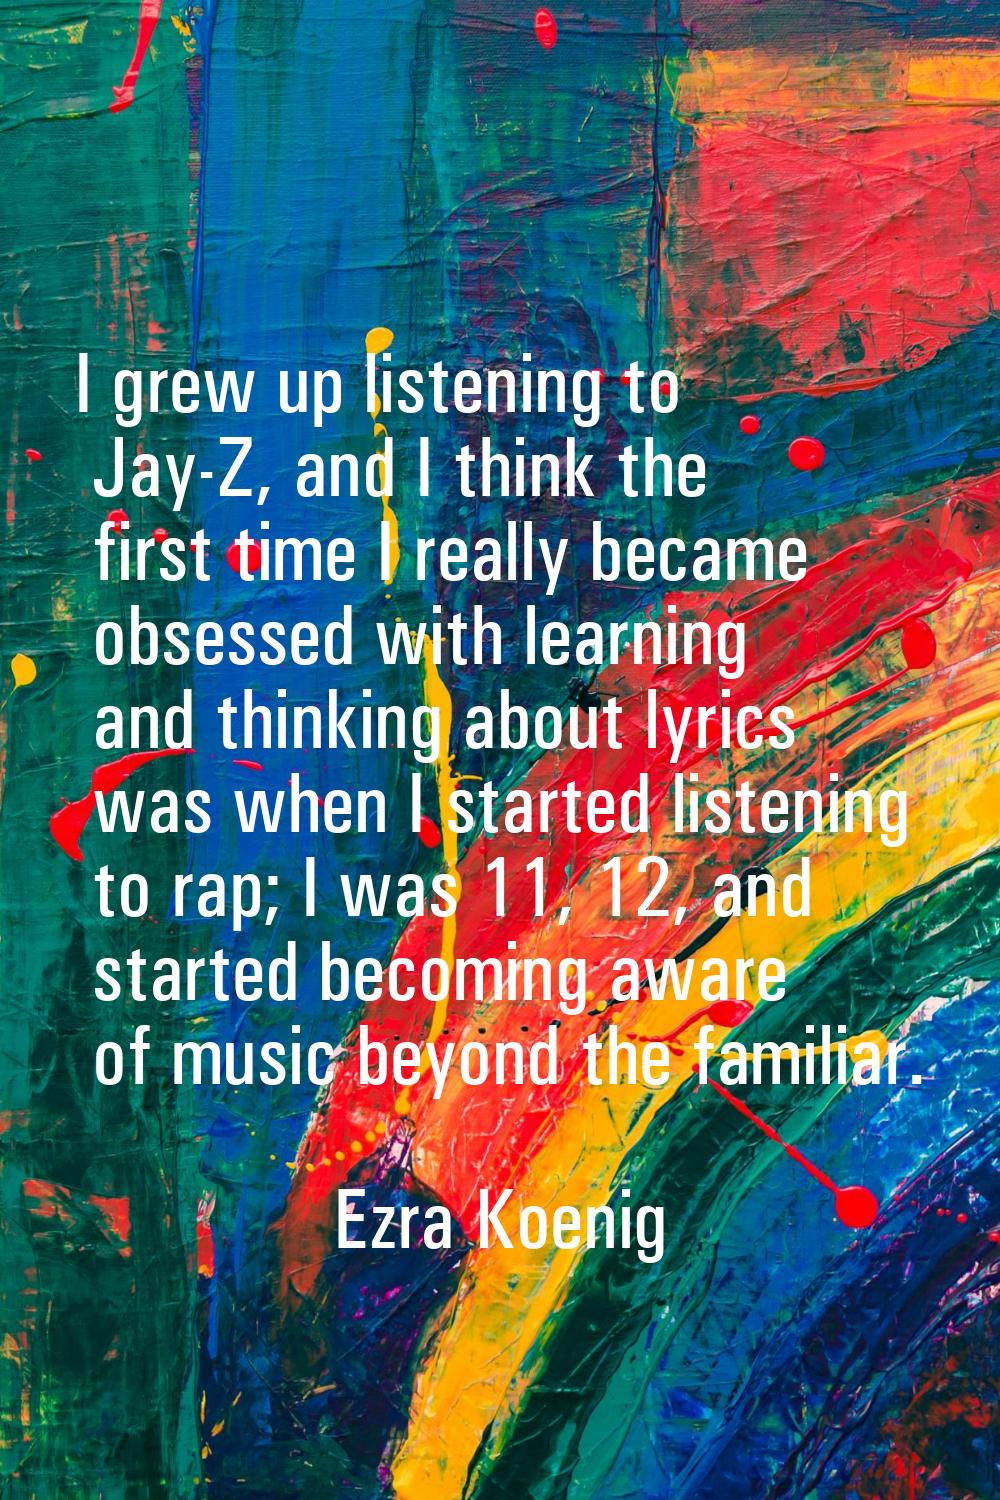 I grew up listening to Jay-Z, and I think the first time I really became obsessed with learning and